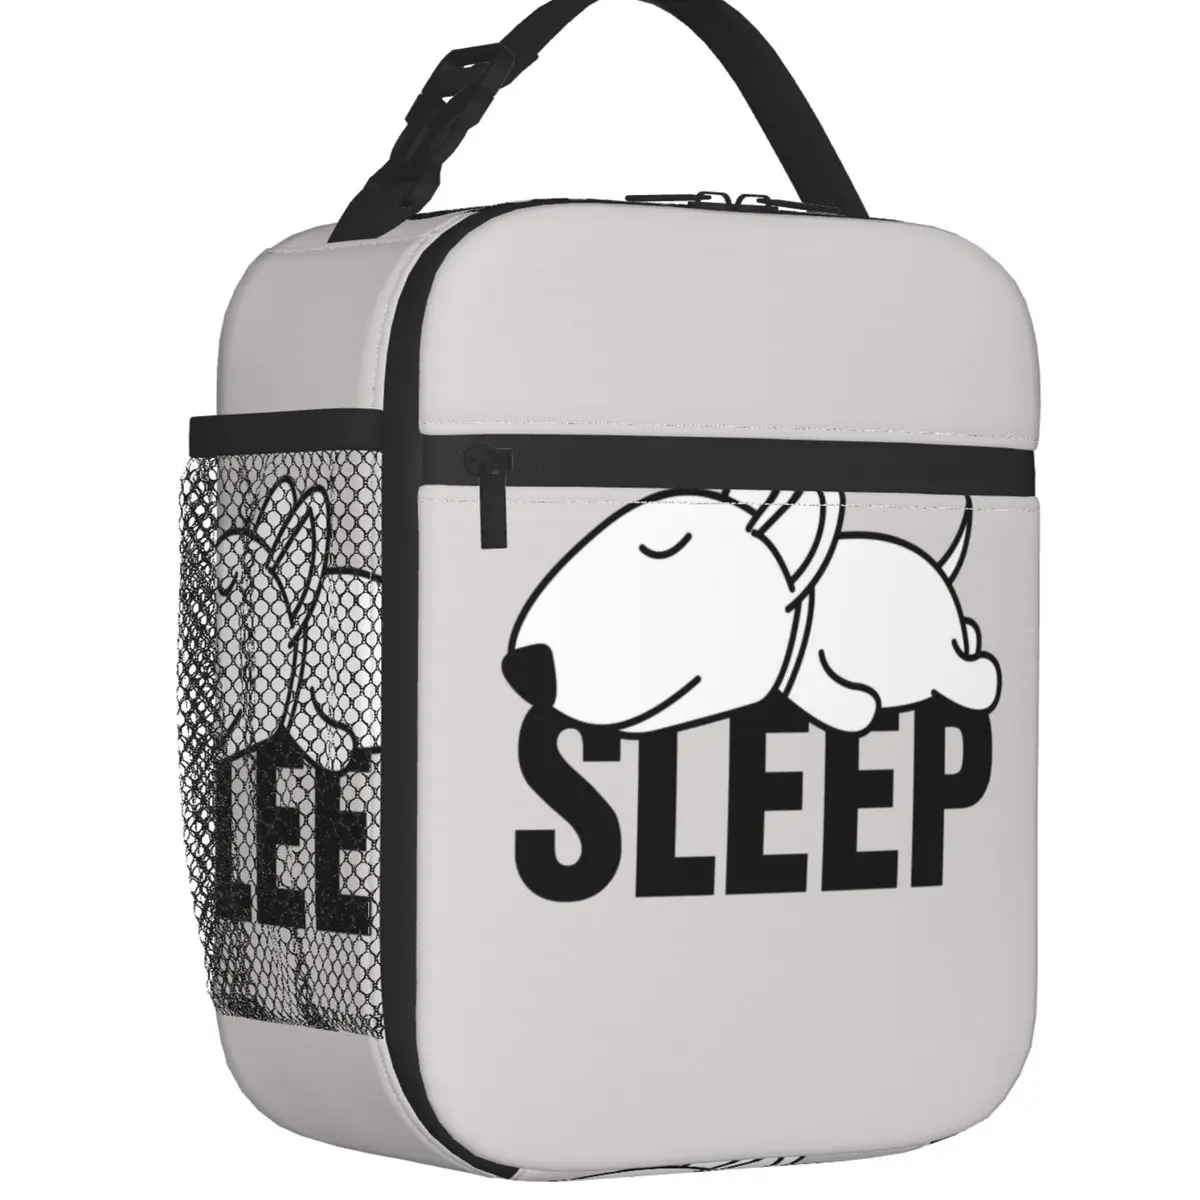 Sleeping Bull Terrier Dog Thermal Insulated Lunch Bags Women Cartoon Animal Resuable Lunch Tote for Kids School Storage Food Box